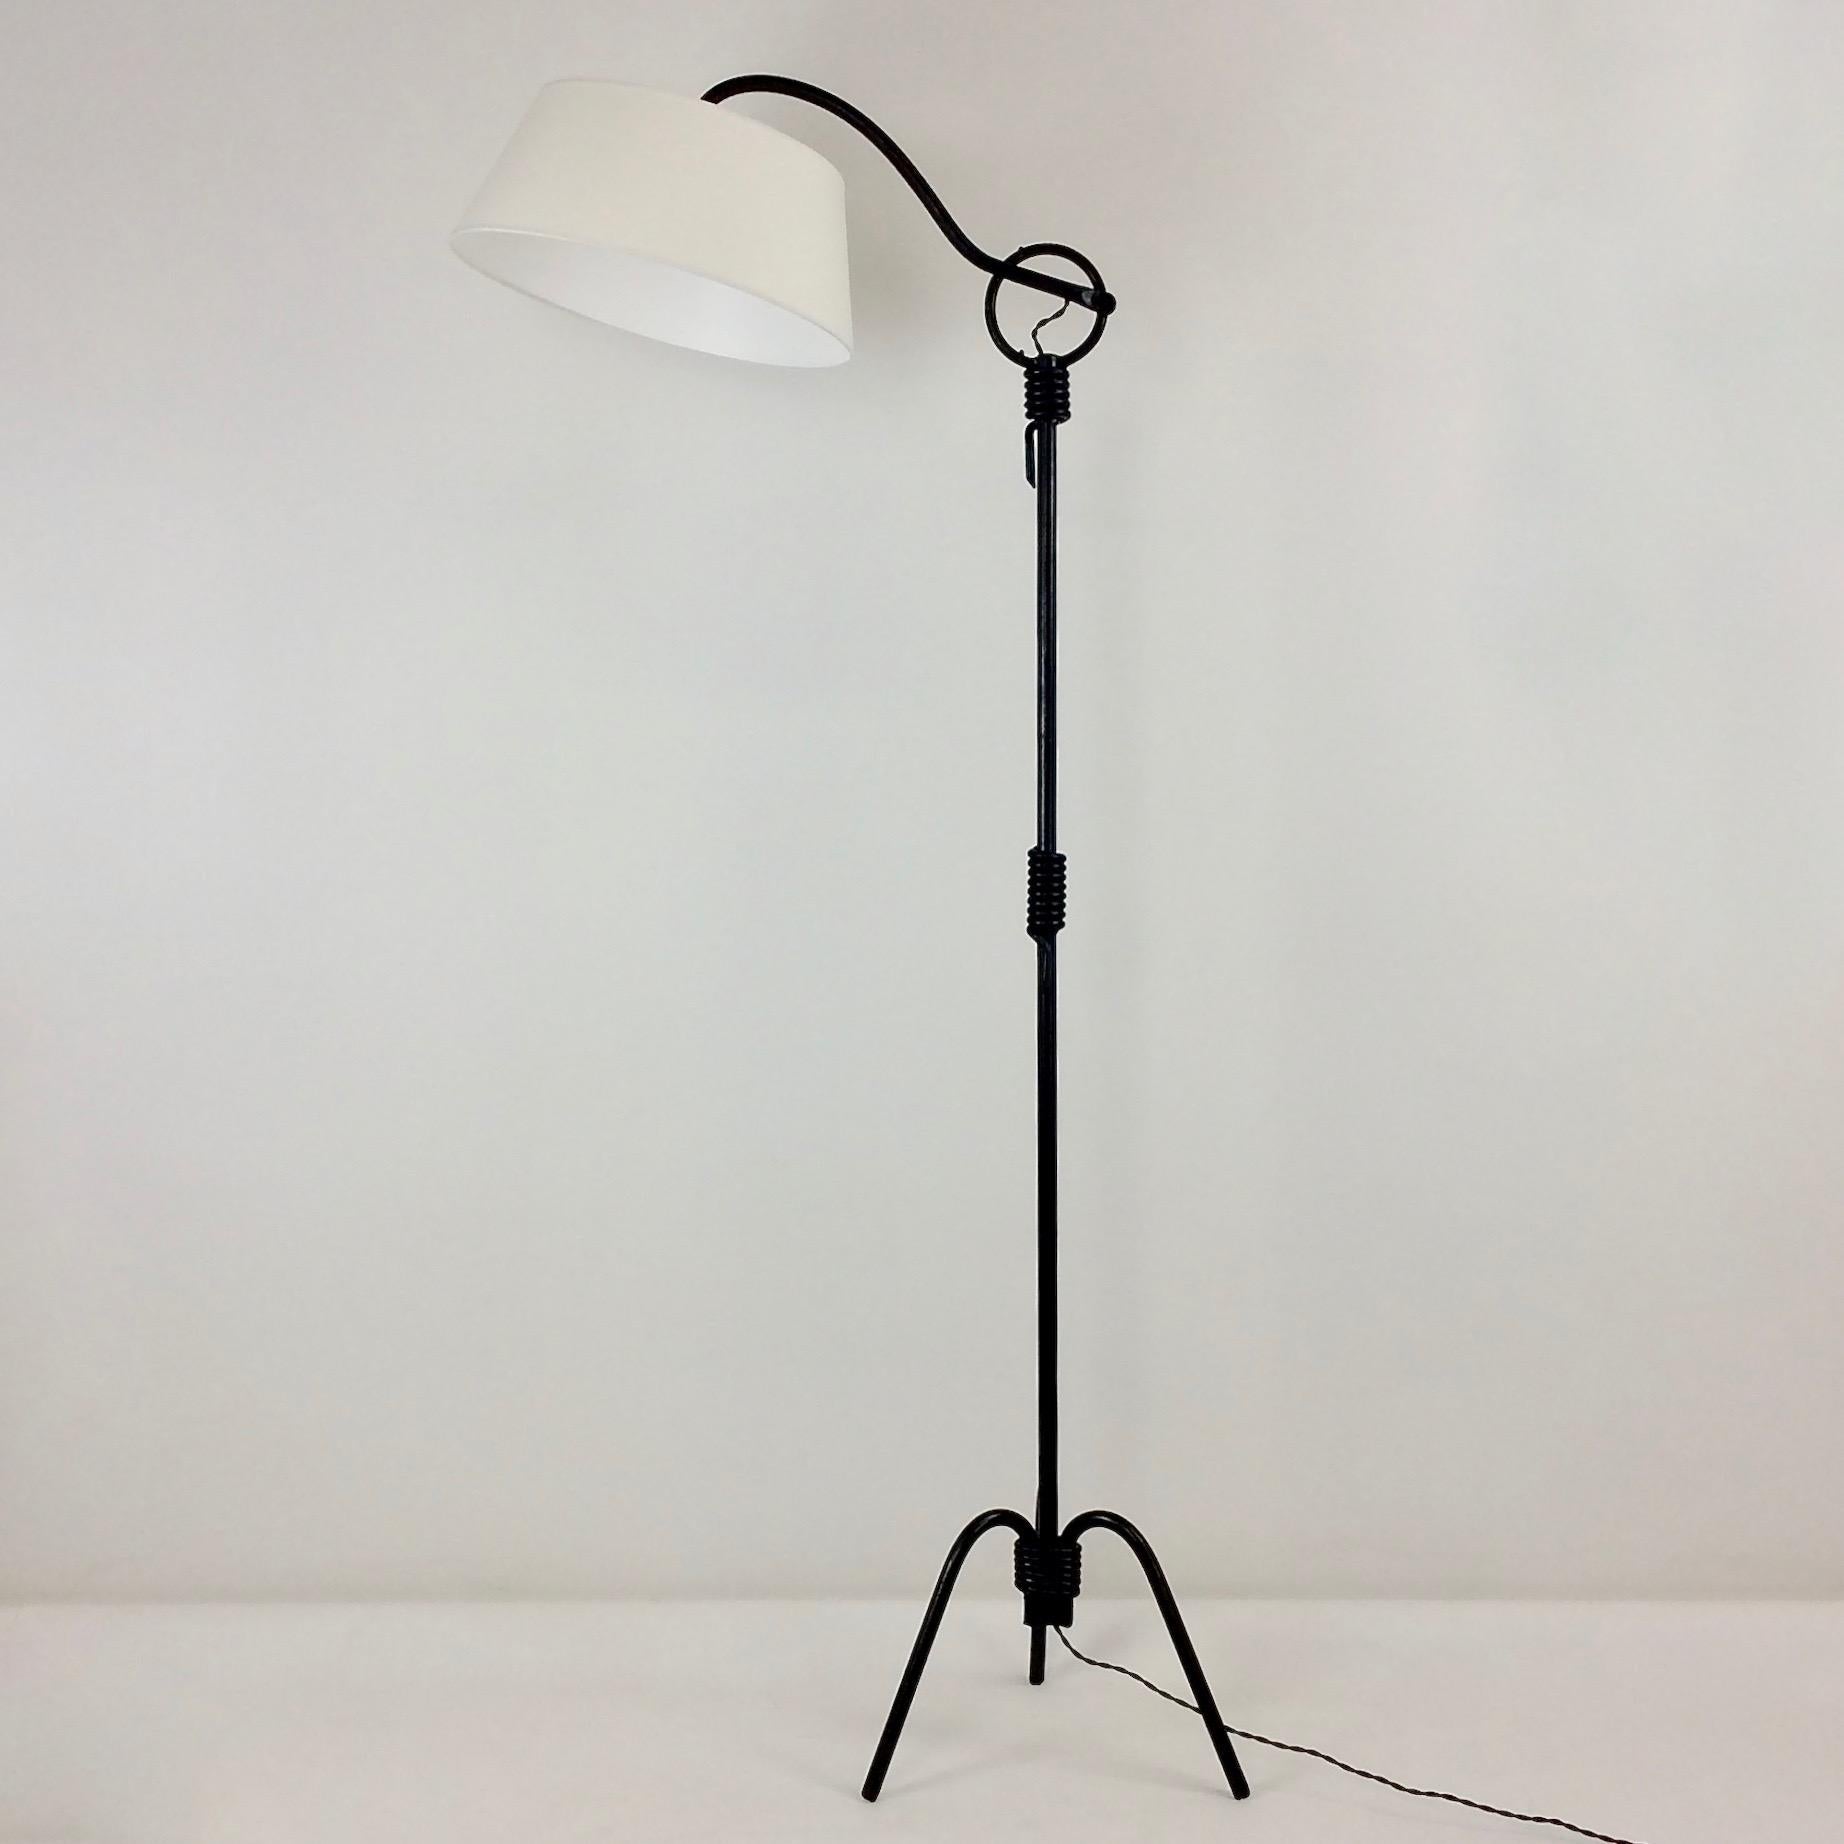 Blackened Mid-Century Attributed Jacques Adnet Floor Lamp, circa 1950, France.